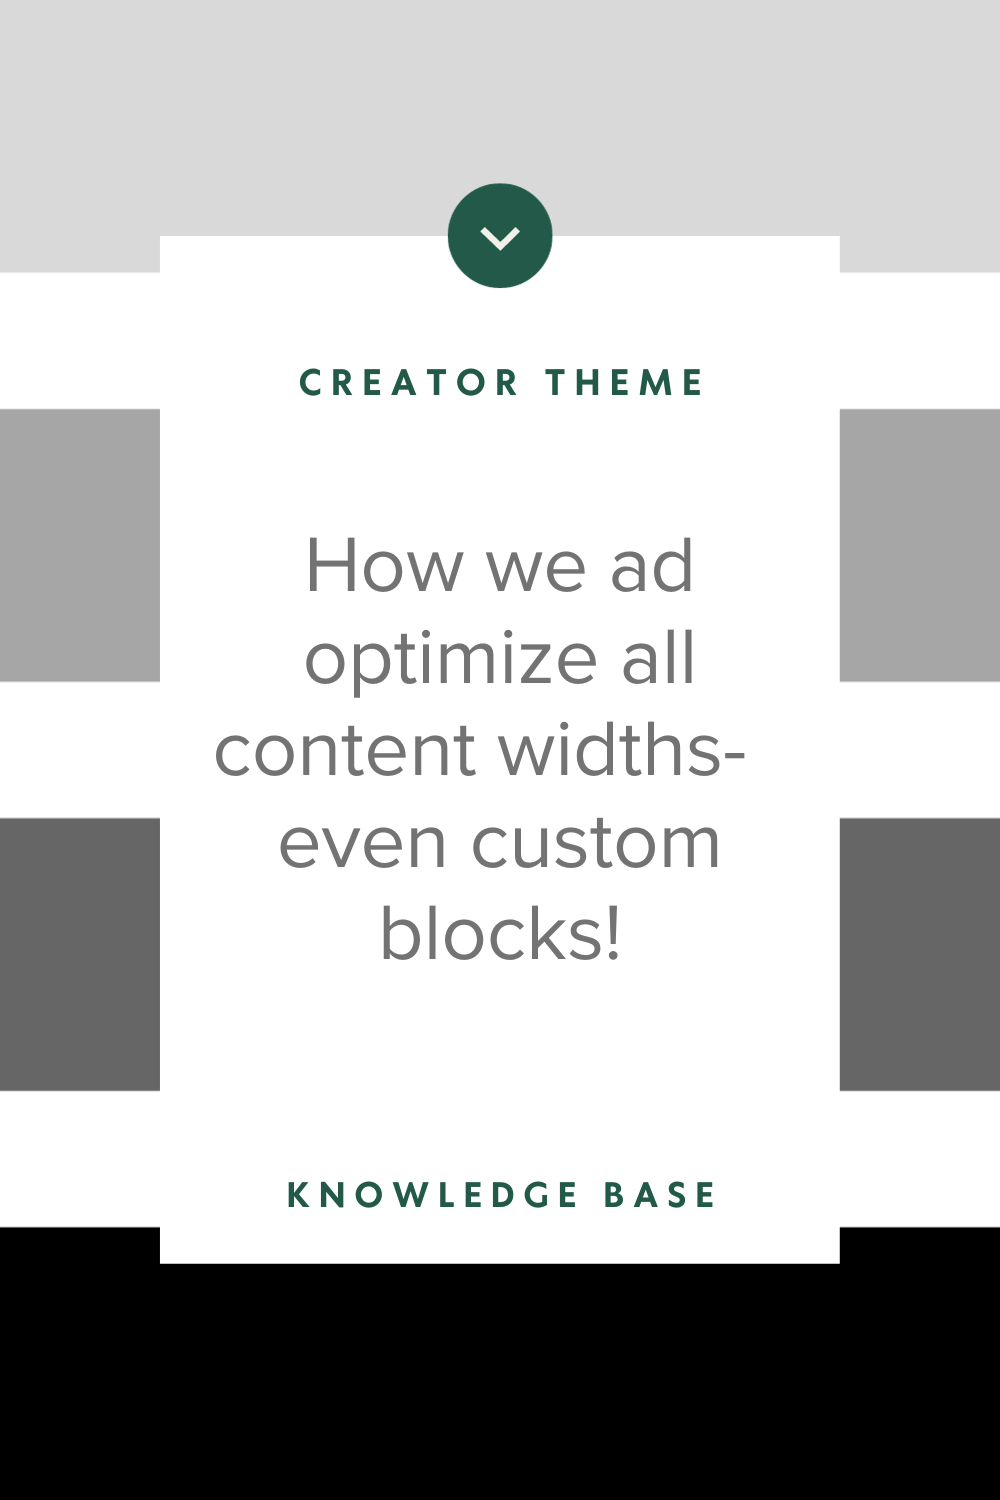 How to ad optimize content width- even custom blocks!